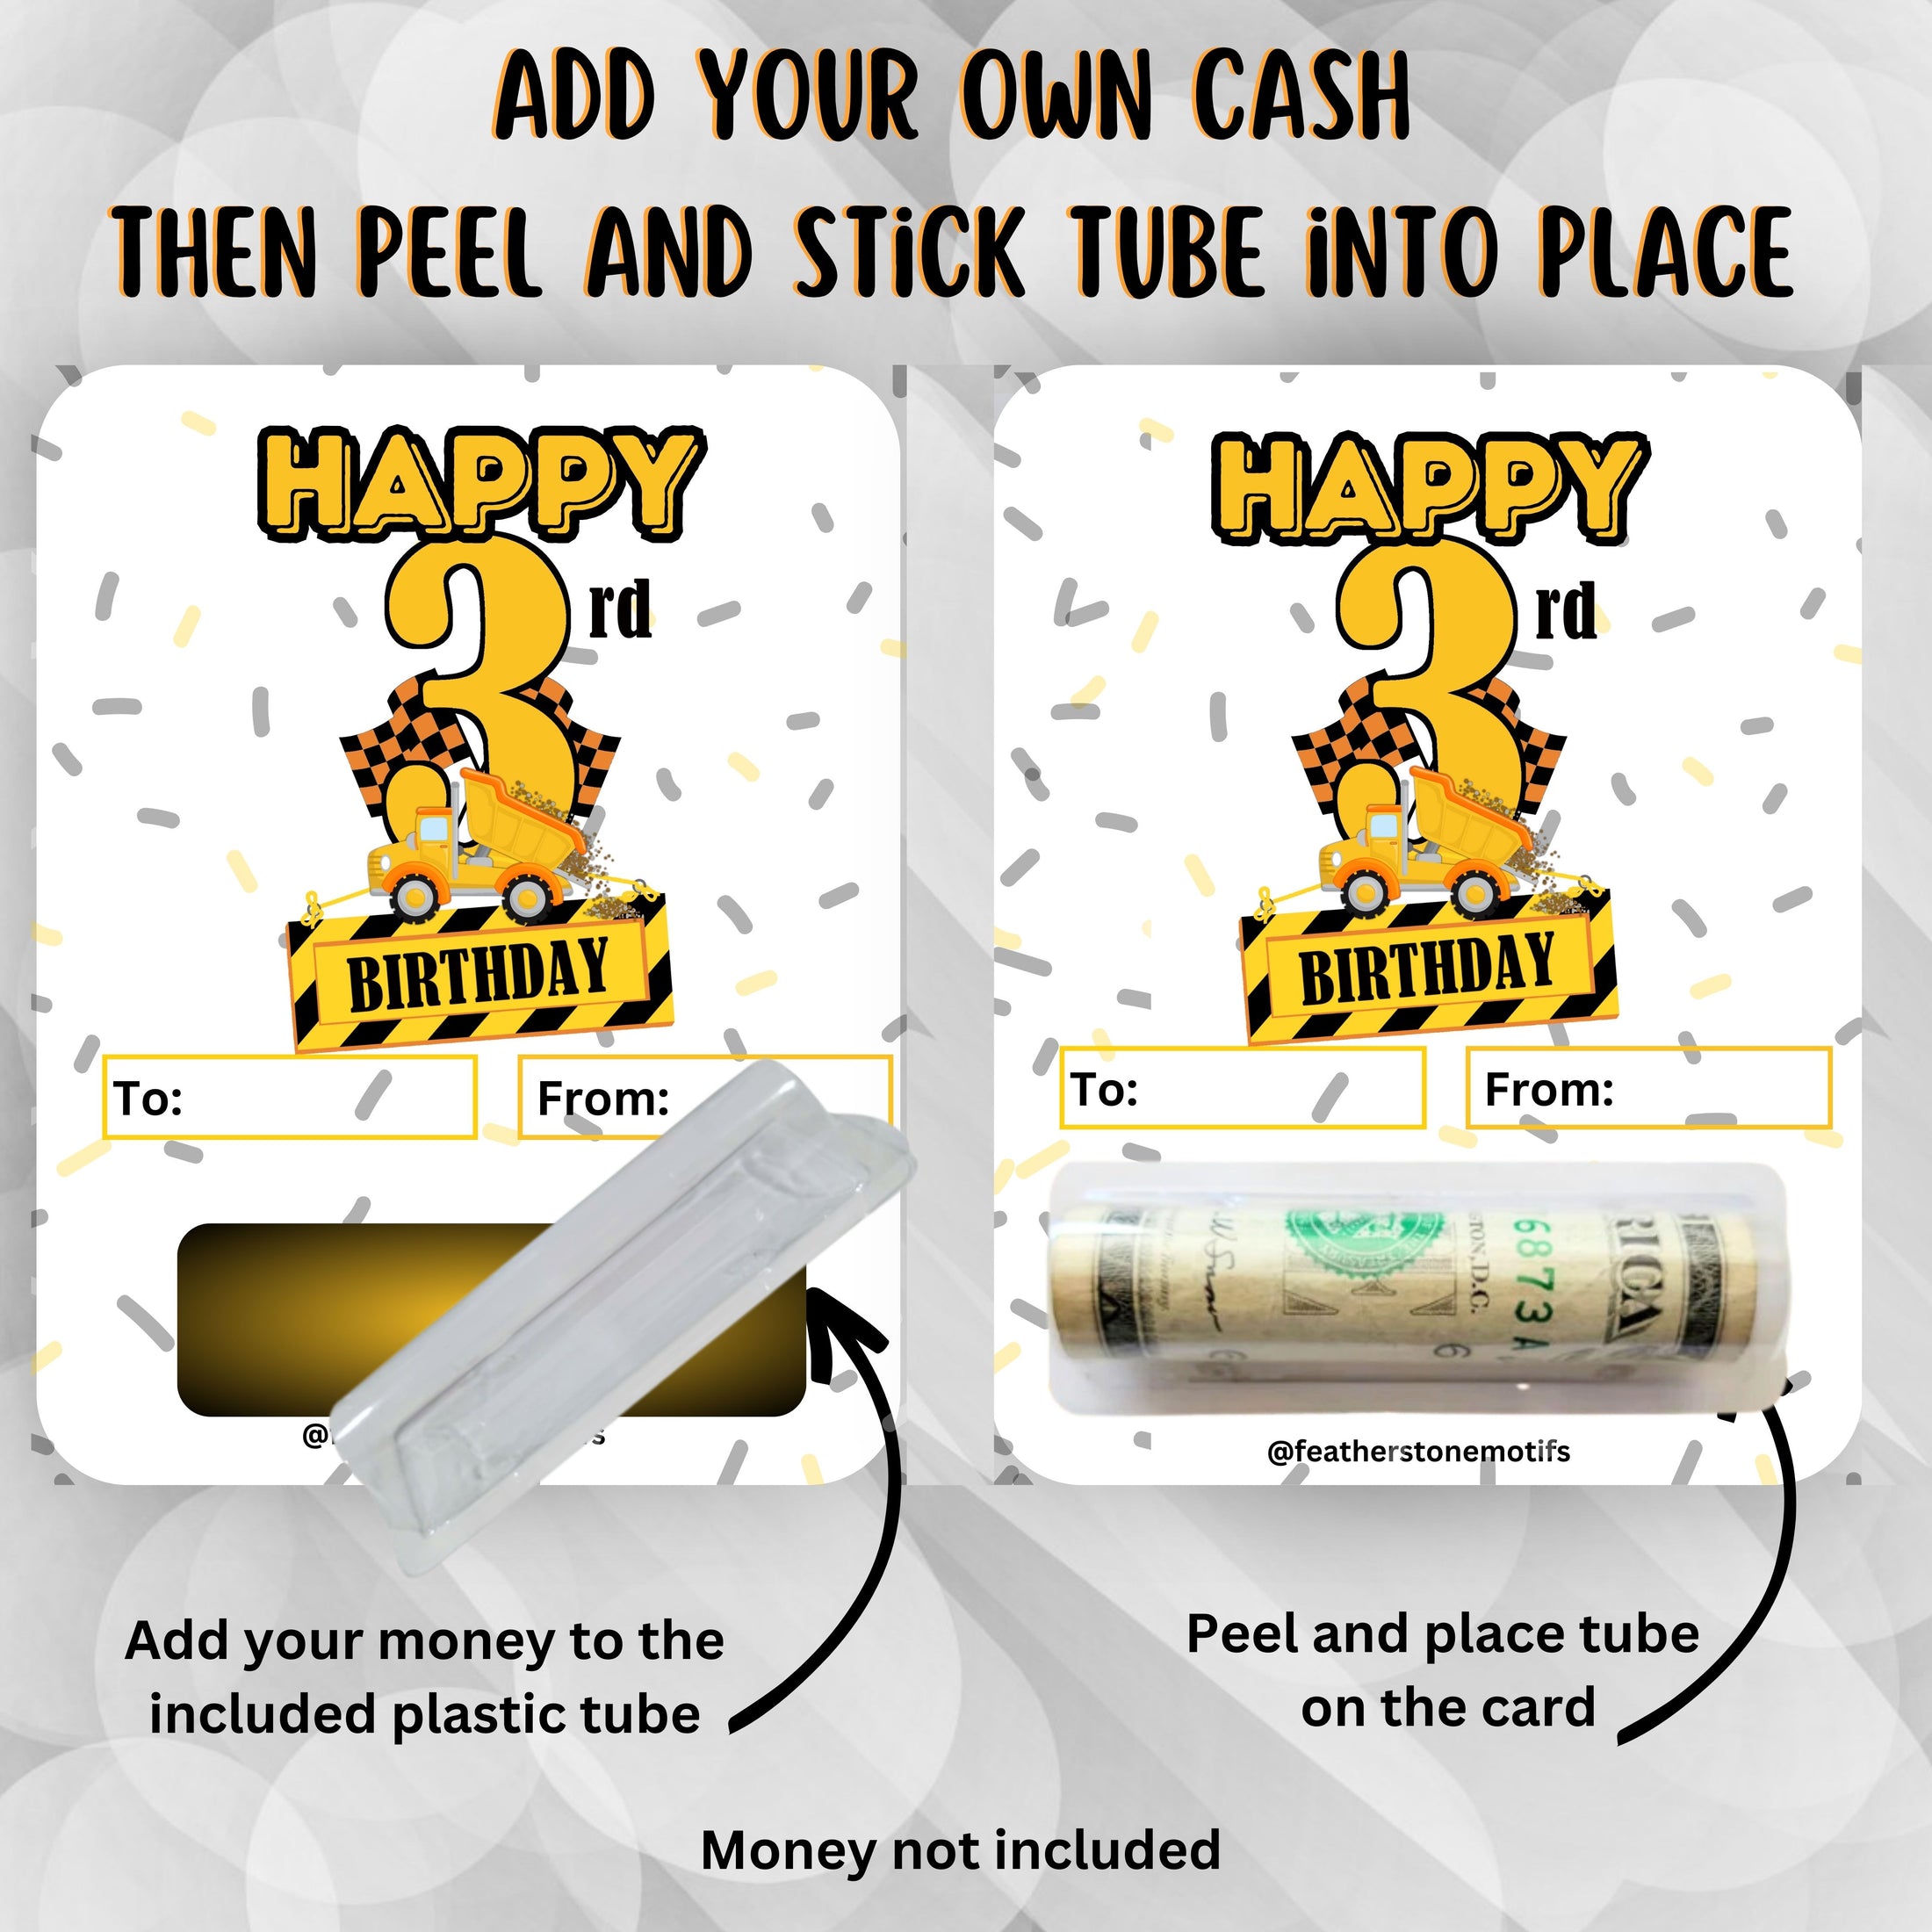 This image shows how to attach the money tube to the Construction Birthday Money Card.